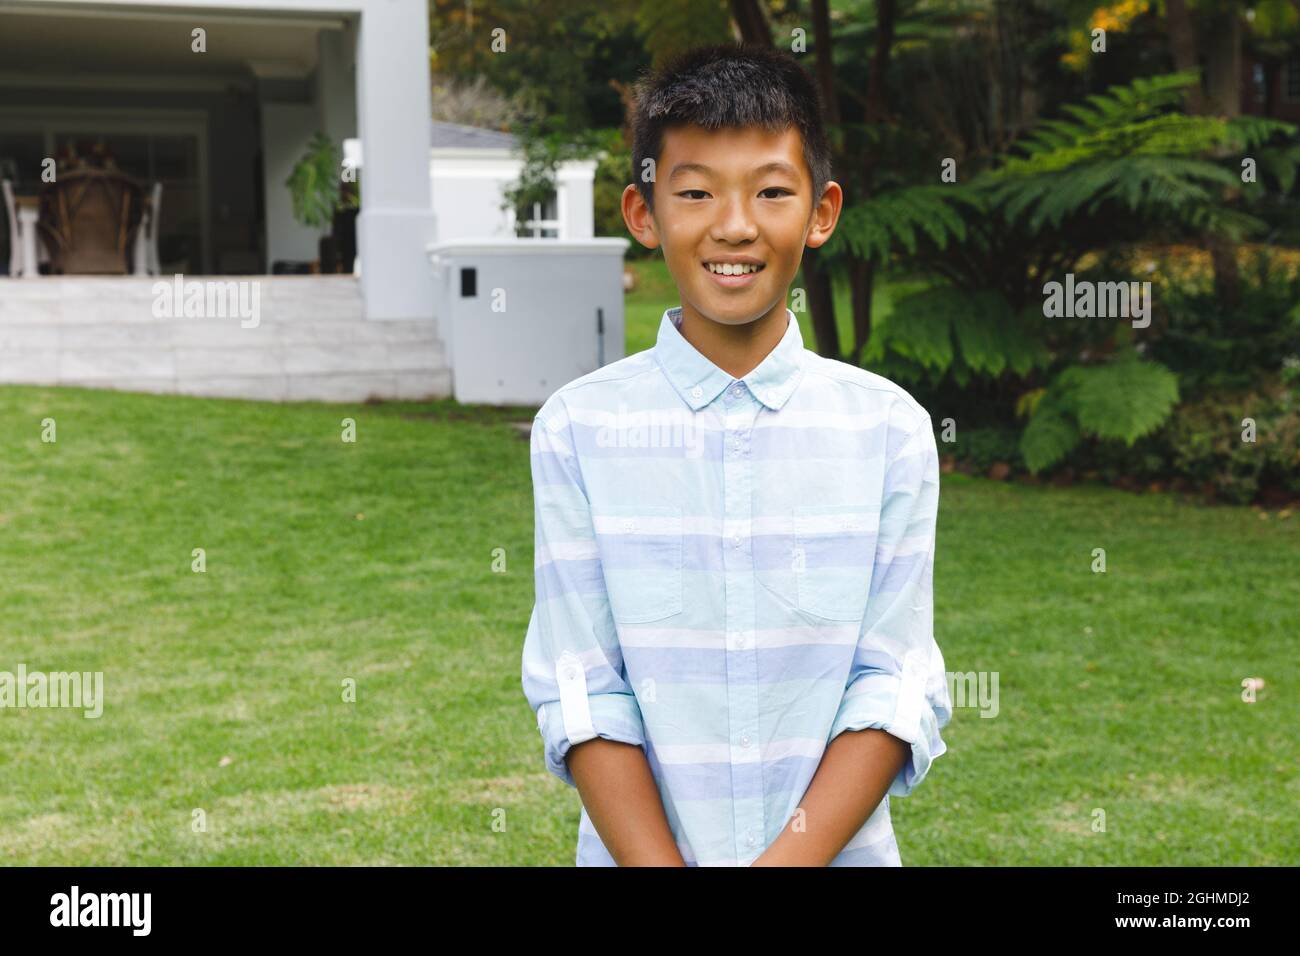 Portrait of smiling asian boy smiling outdoors and wearing casual clothes in garden Stock Photo